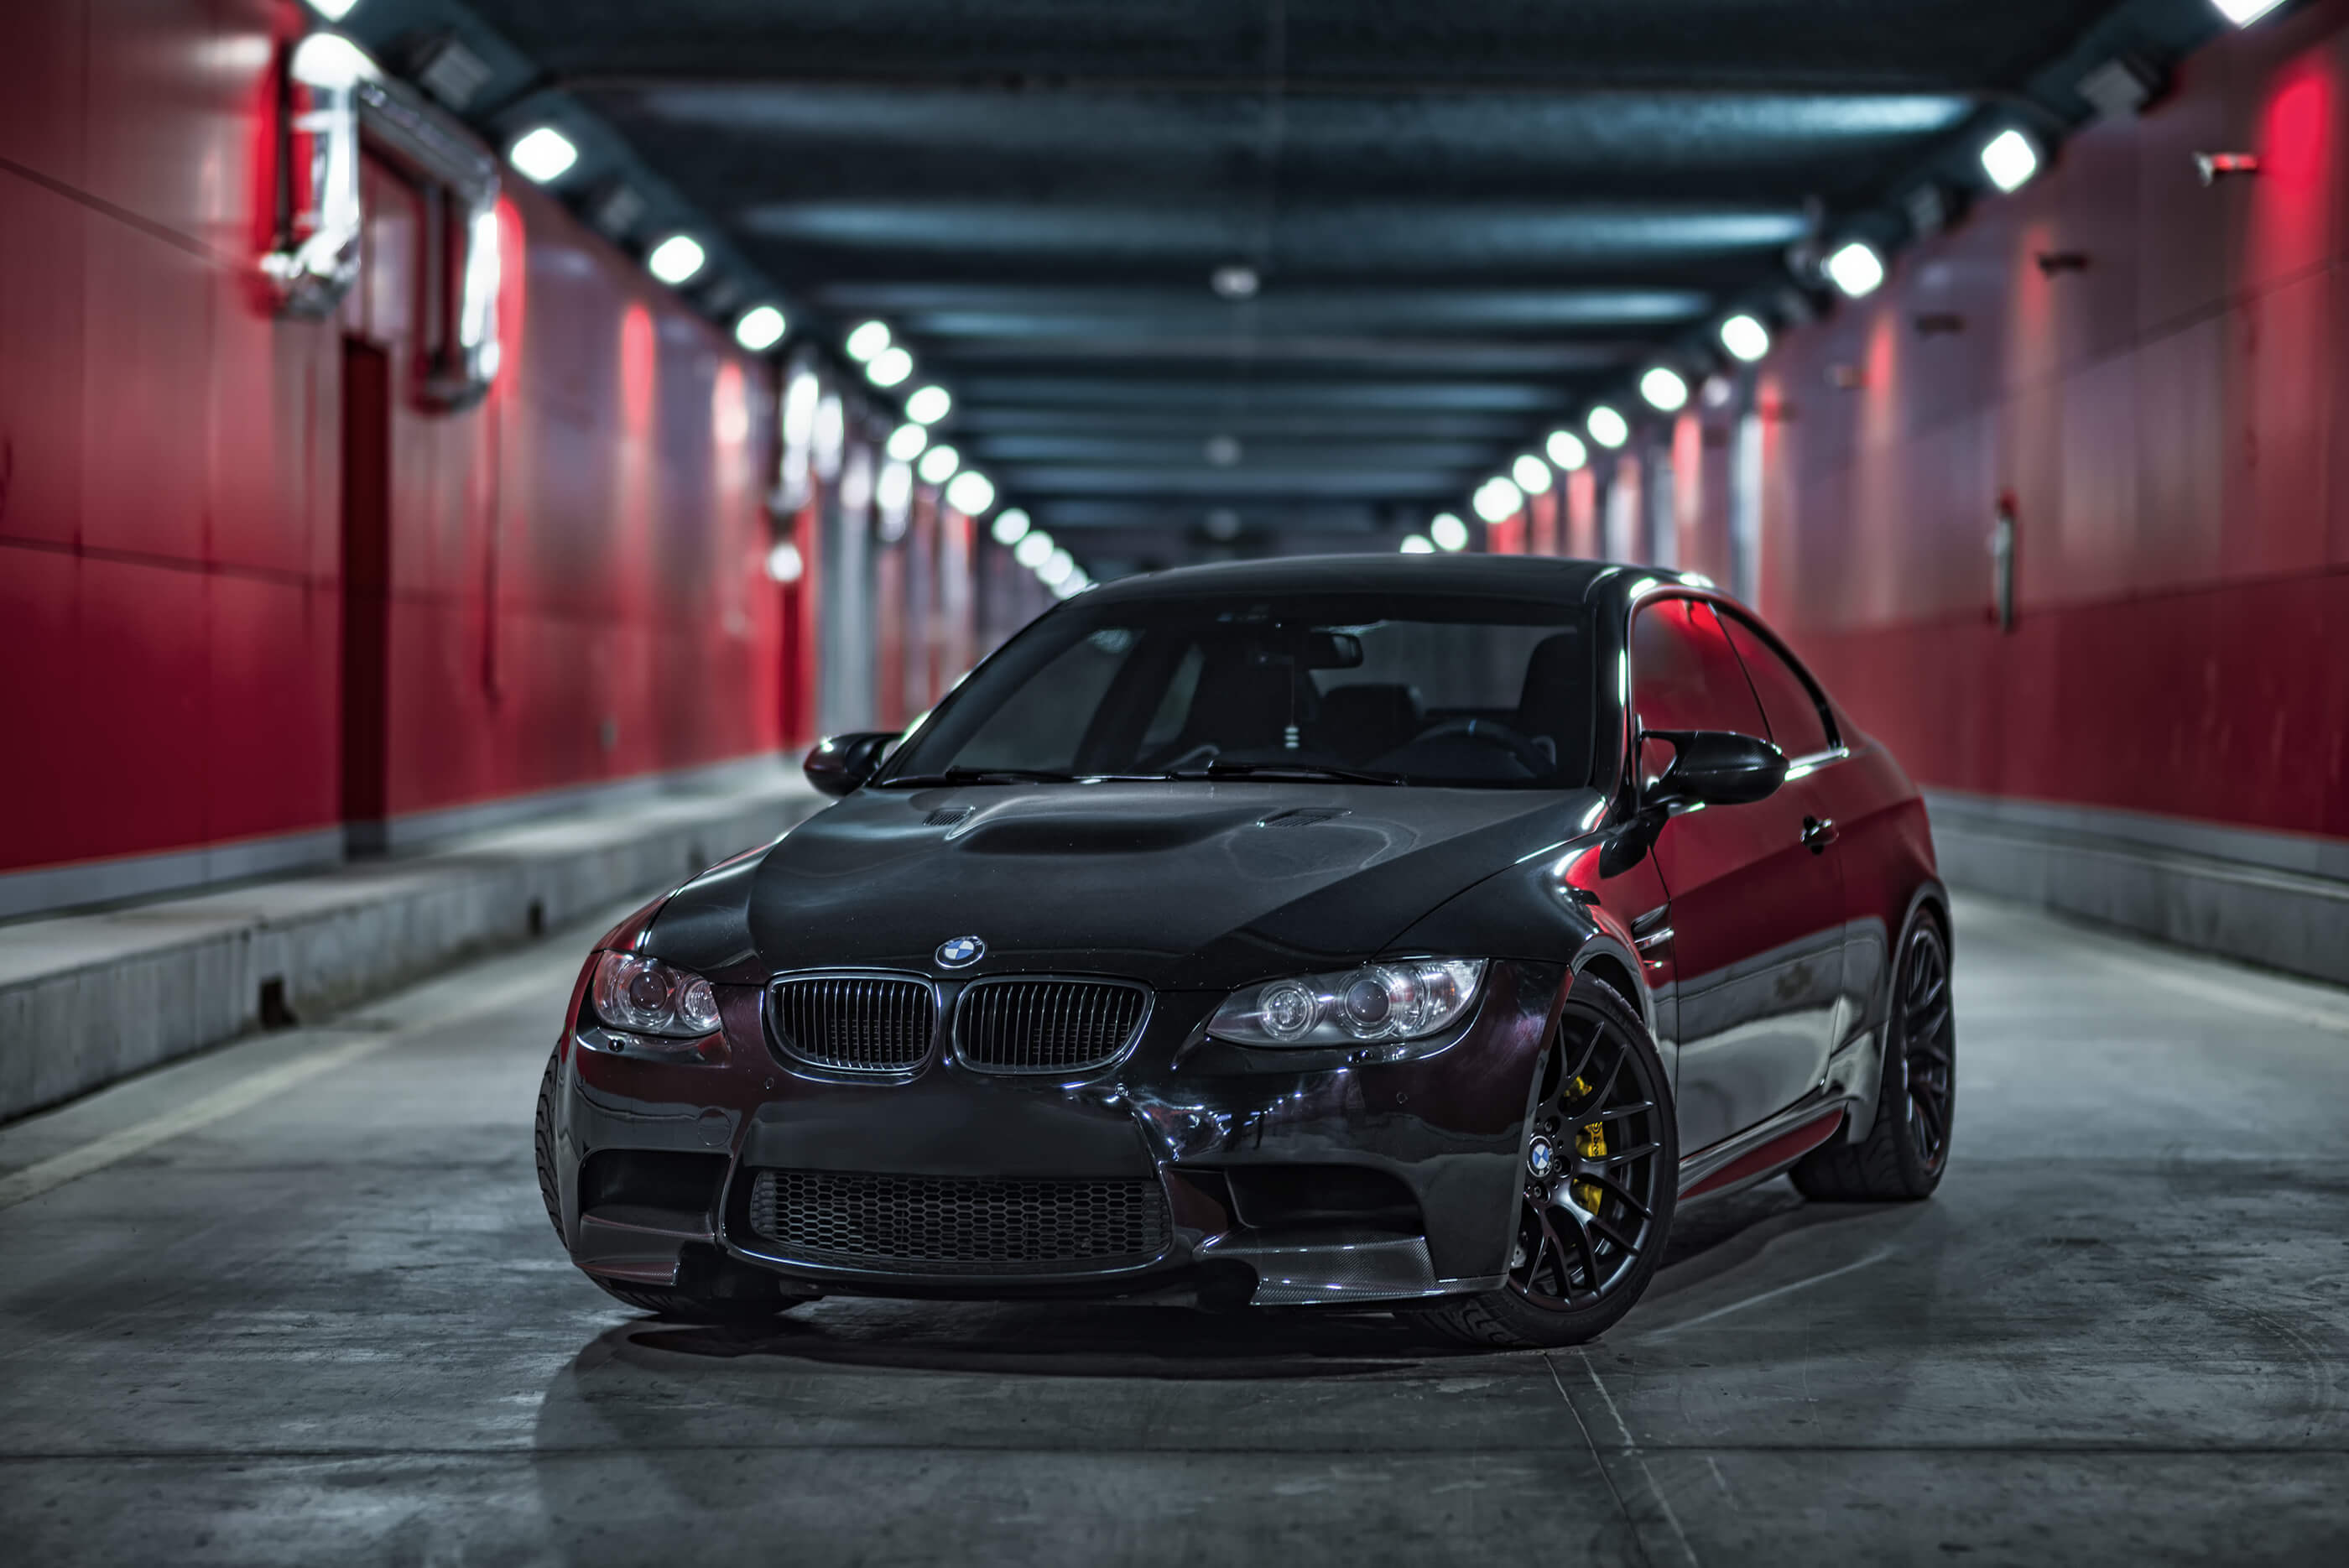 Why Choose Dinan Parts for Your BMW?